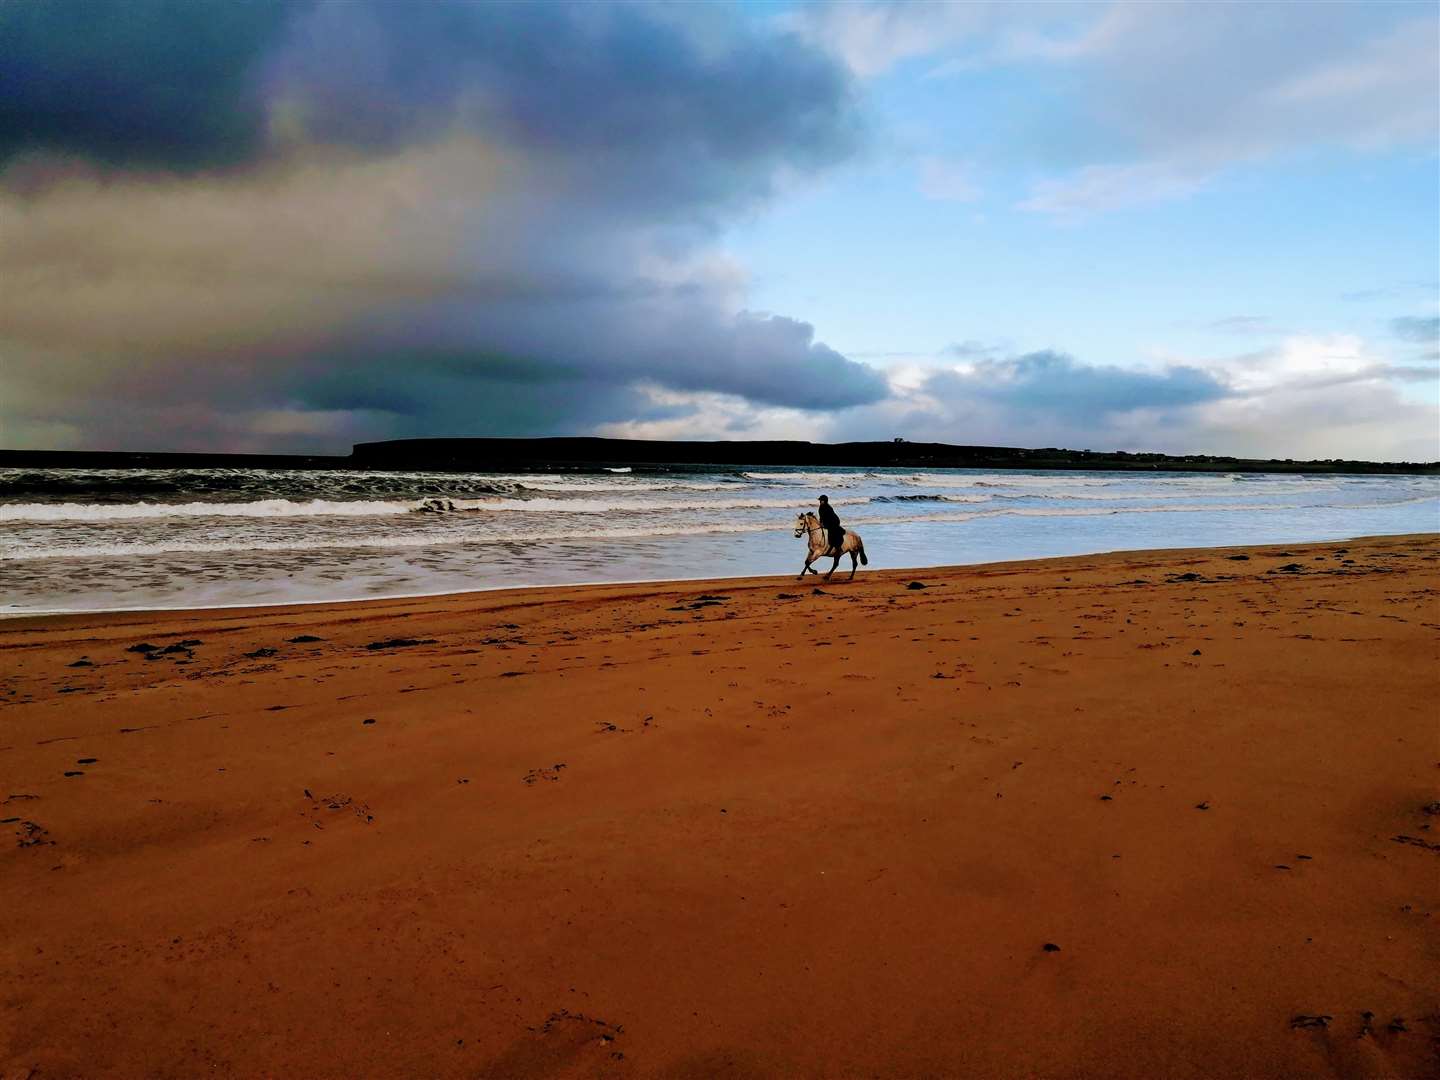 New year's day on Dunnet beach from David Lindsay.